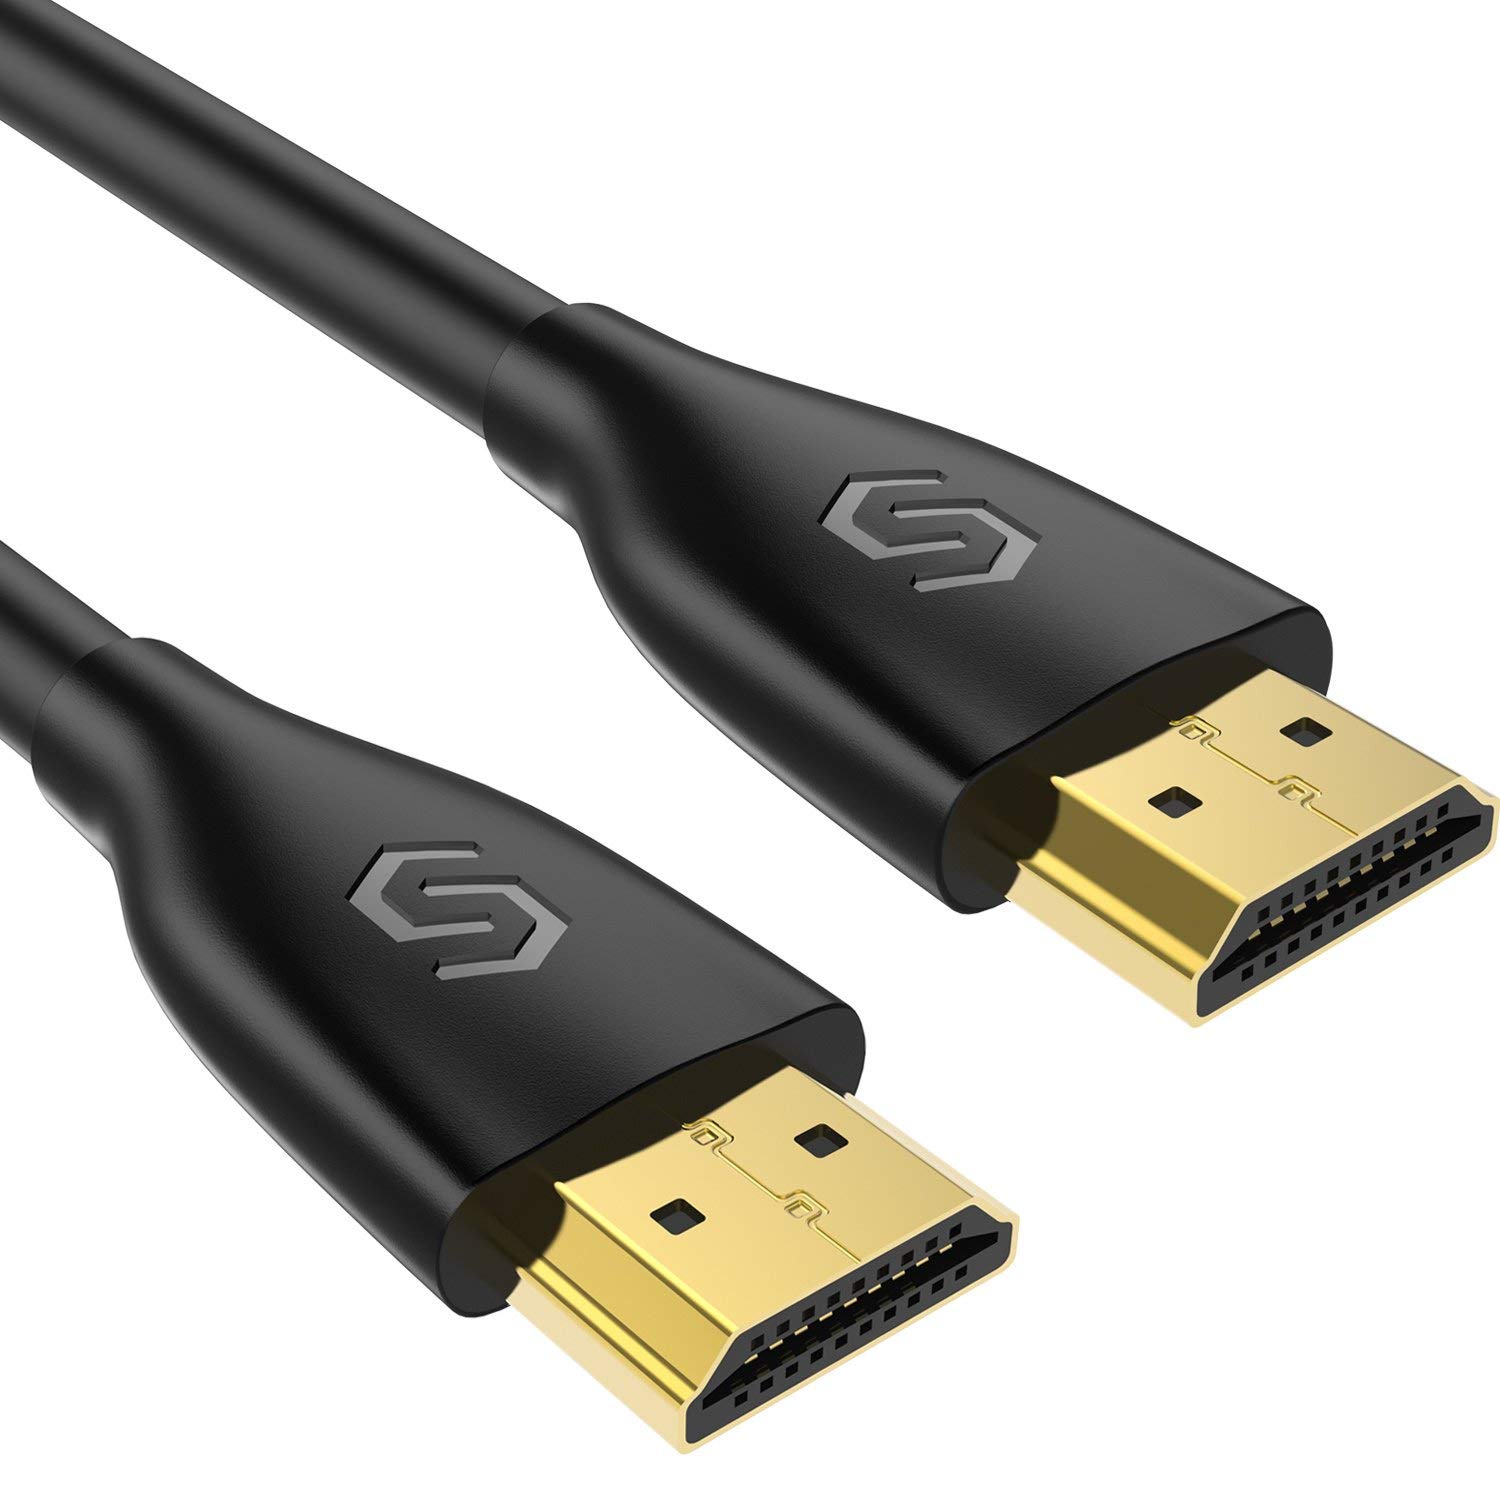 Fully wired hdmi compliant cable